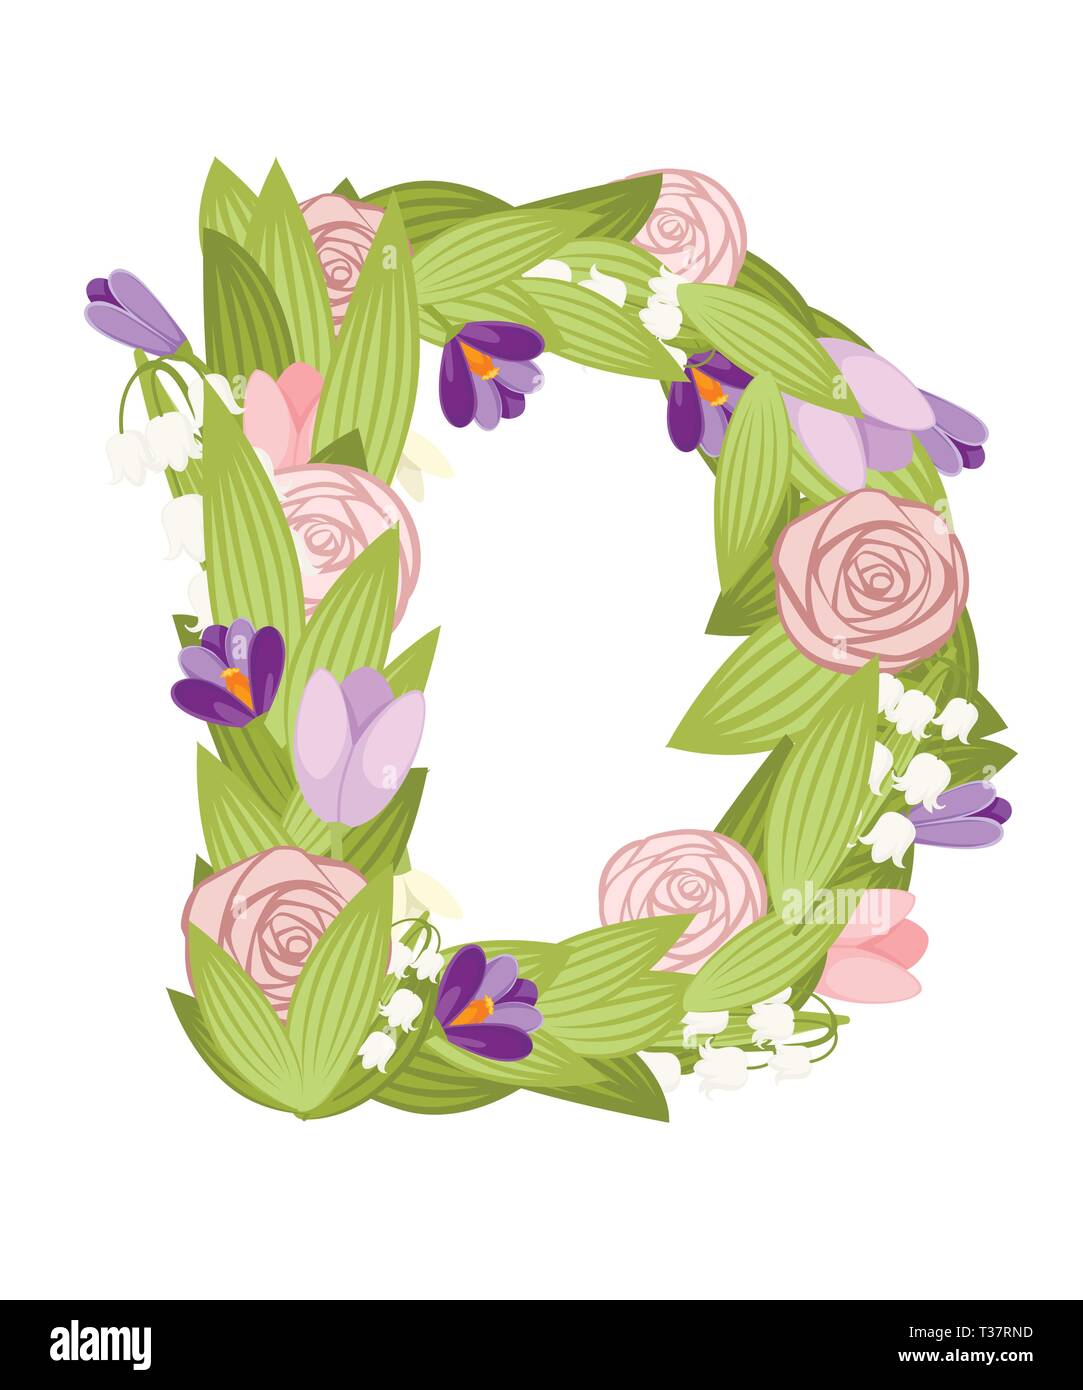 D letter. Cartoon flower font design. Letter with flowers and leaves. Flat vector illustration isolated on white background. Stock Vector